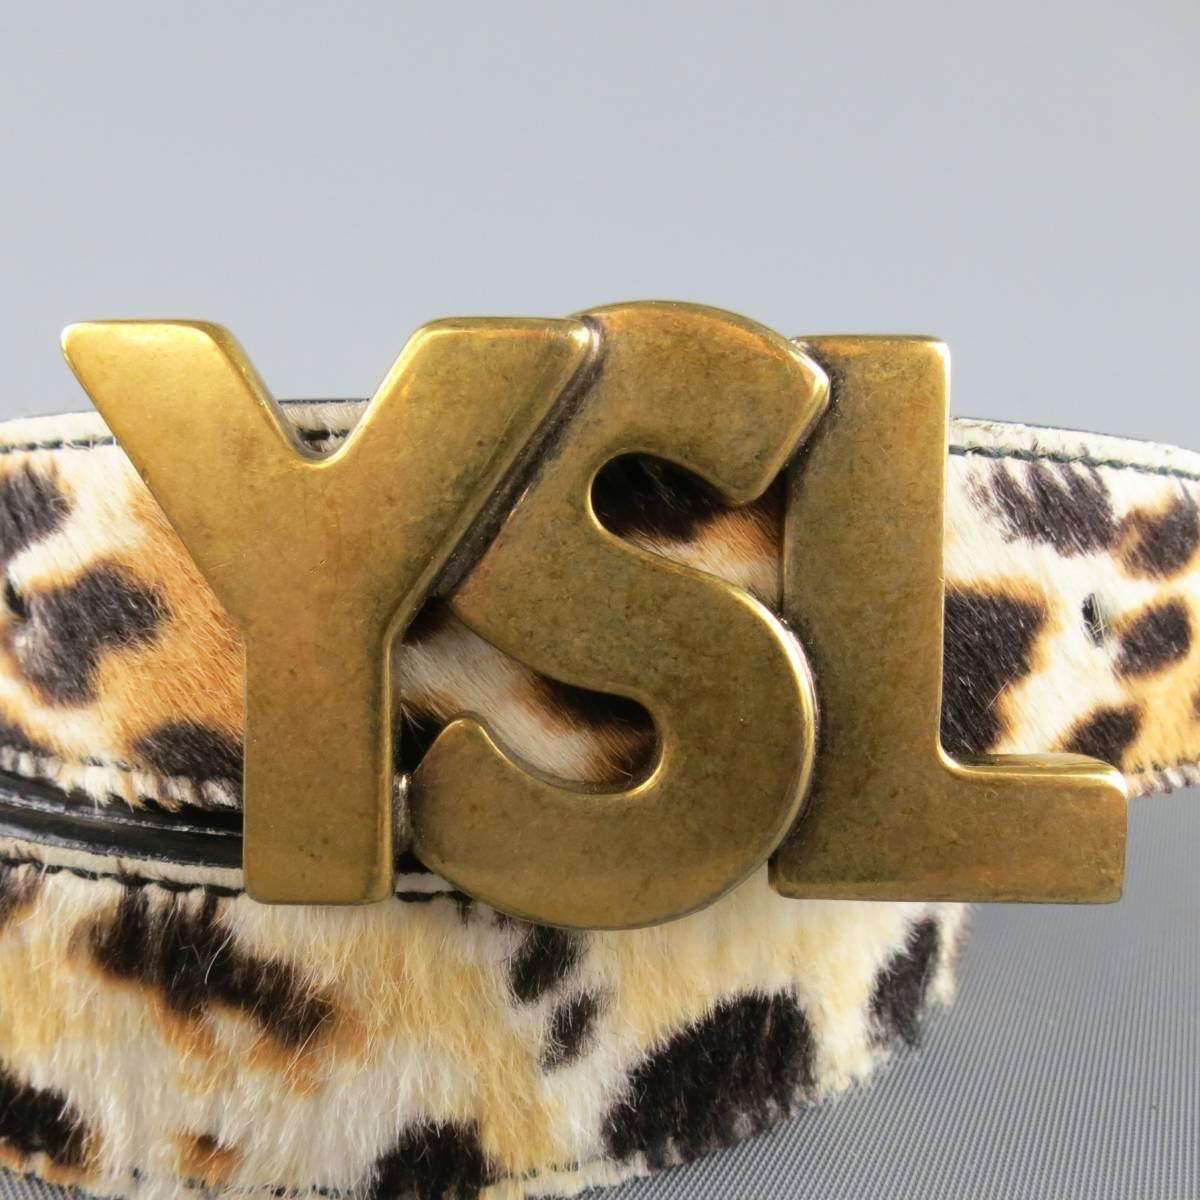 Retro inspired YVES SAINT LAURENT by TOM FORD belt features a cream cheetah leopard print pony hair skinny strap and dark gold tone YSL logo brass buckle. Wear throughout.  Made in Italy.
 
Good Pre-Owned Condition.
Marked: 40
 
Length: 45